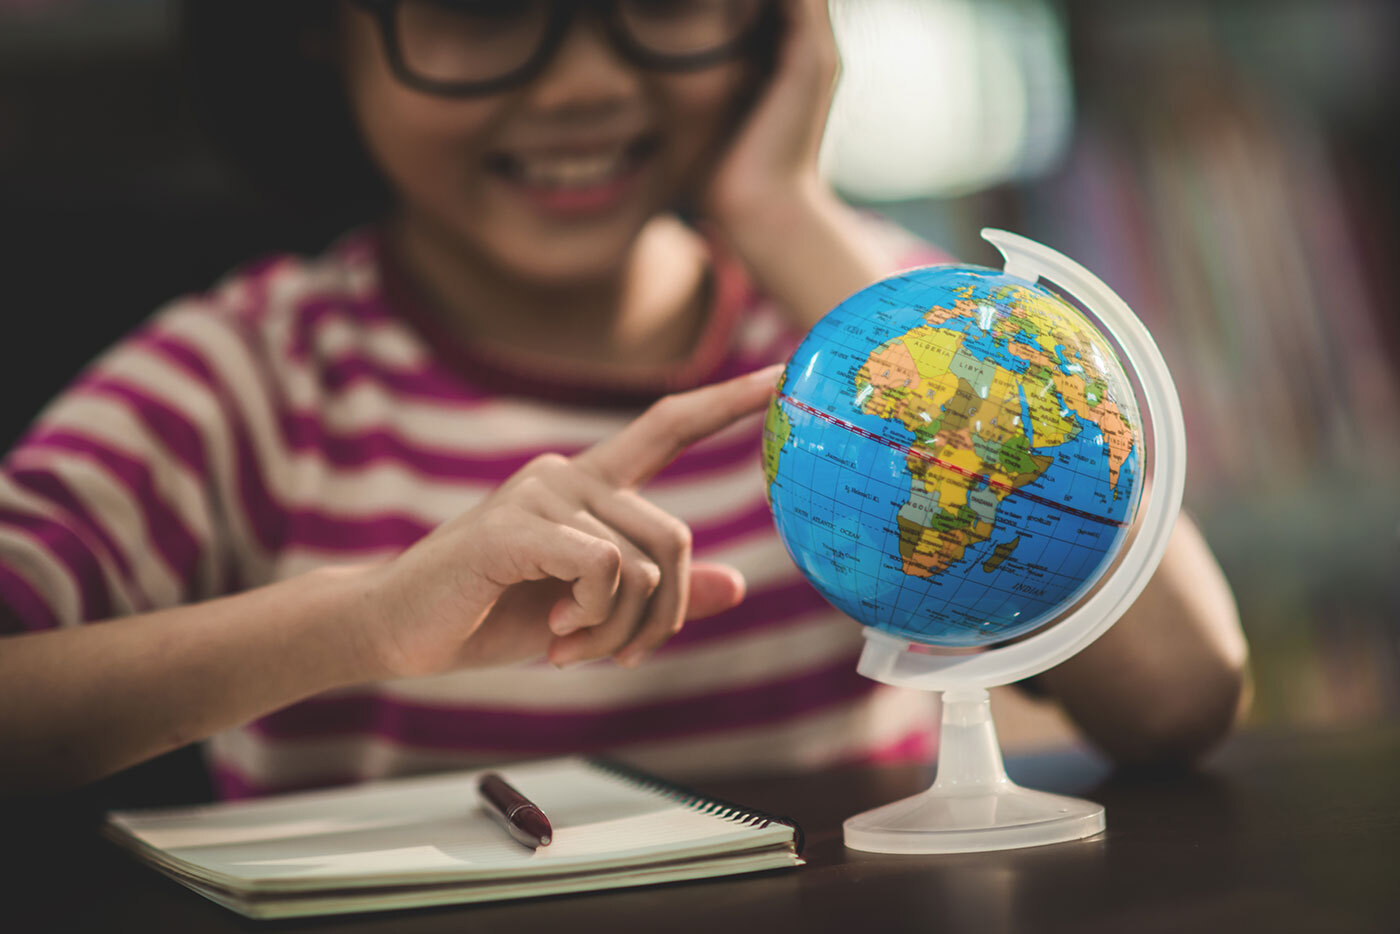 Student playing with a globe